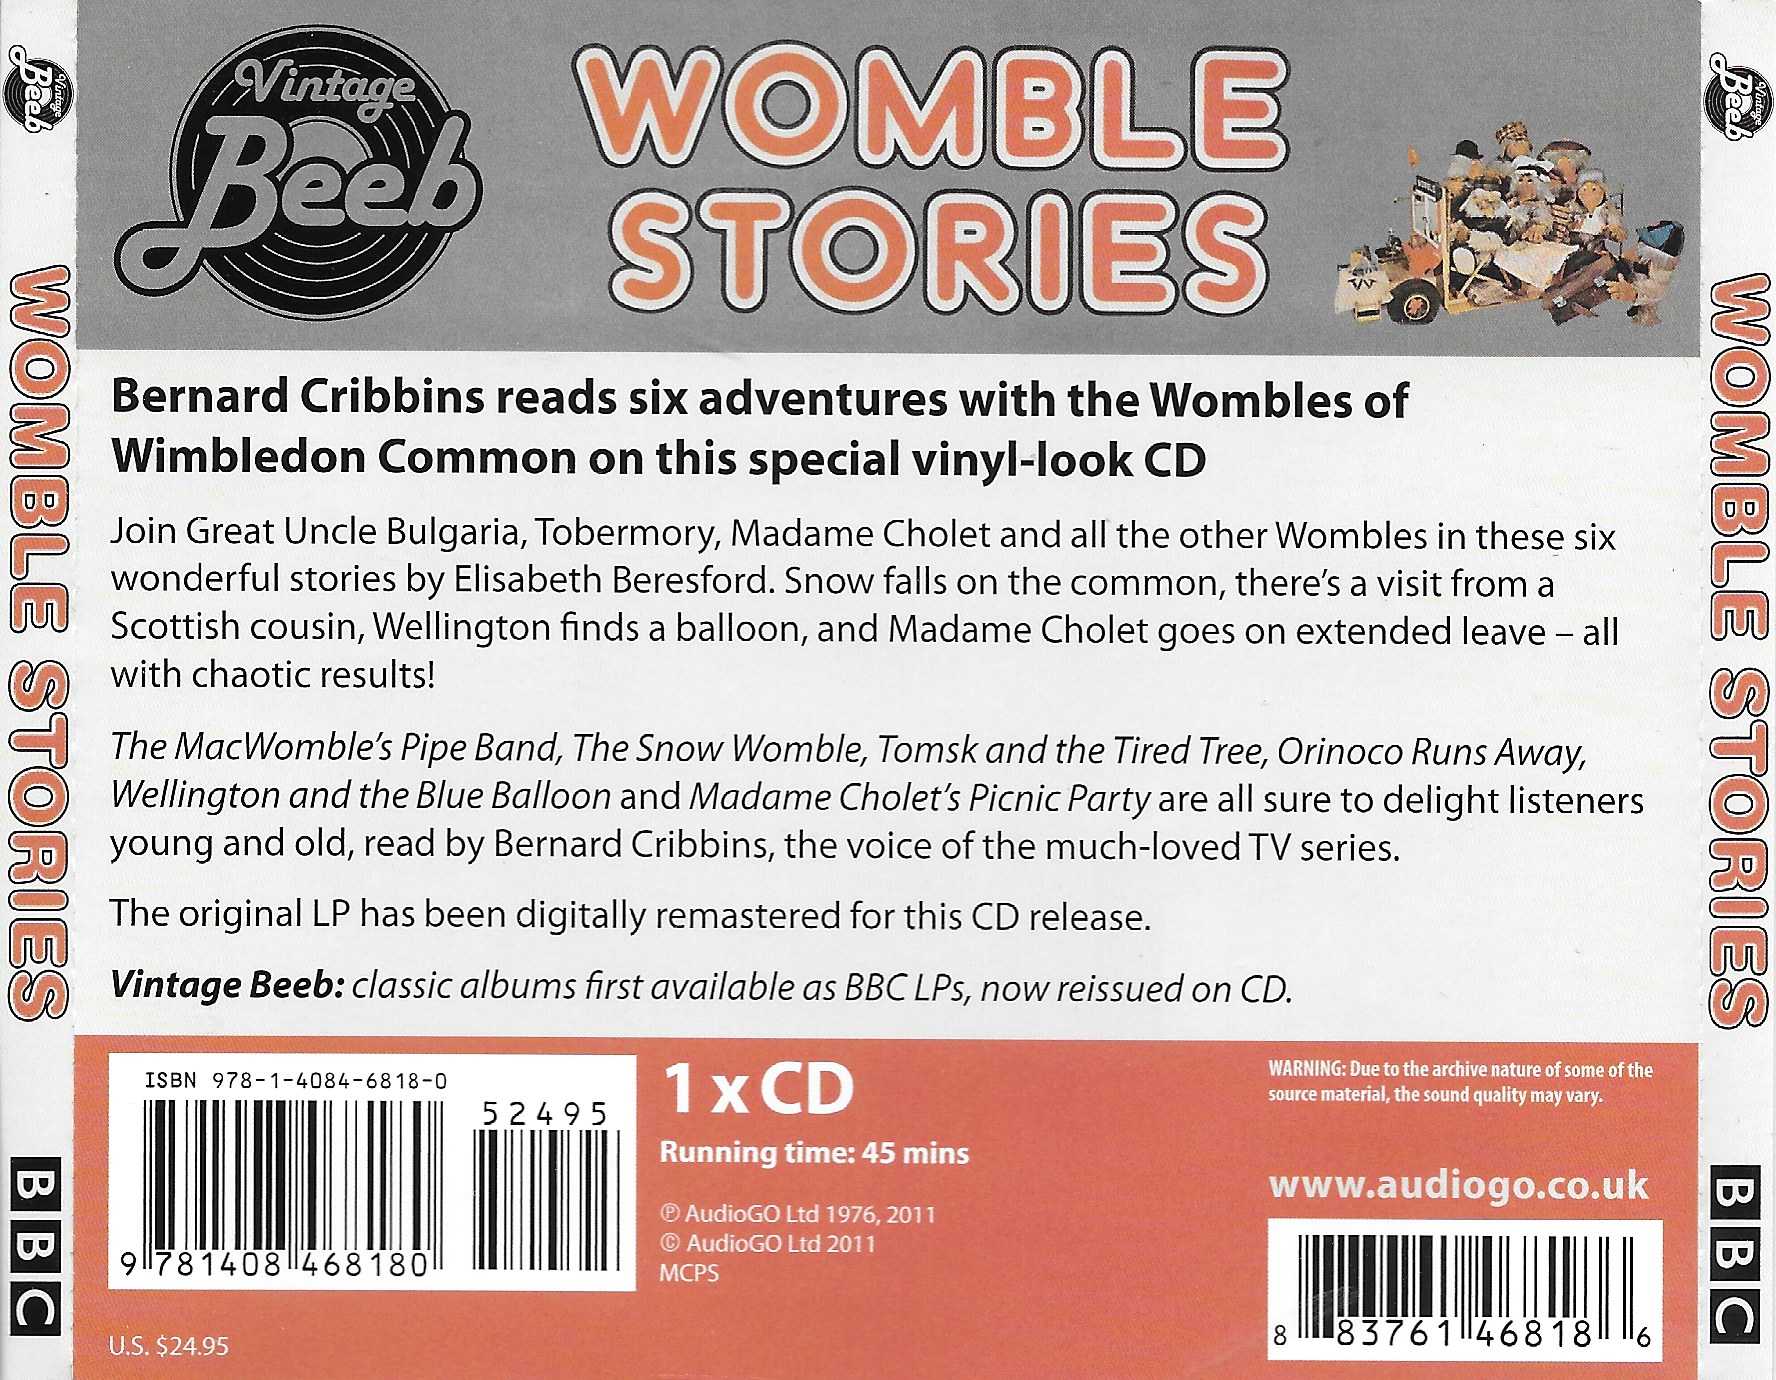 Picture of ISBN 978-1-4084-6810-0 Womble stories by artist Bernard Cribbins from the BBC records and Tapes library